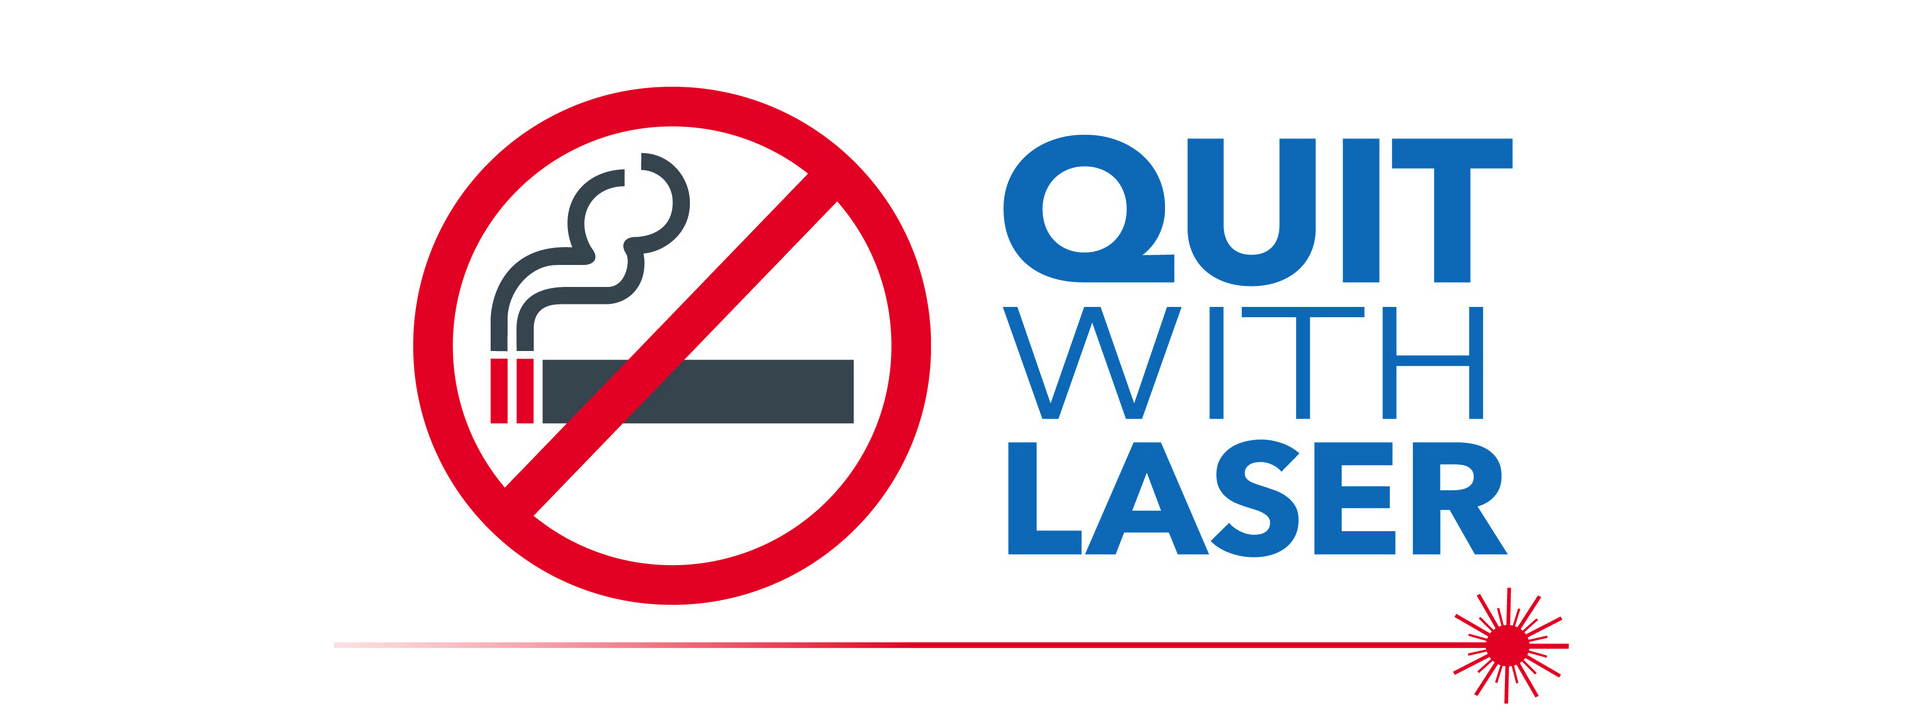 Quit Smoking and Nicotine with Laser Therapy in Ottawa